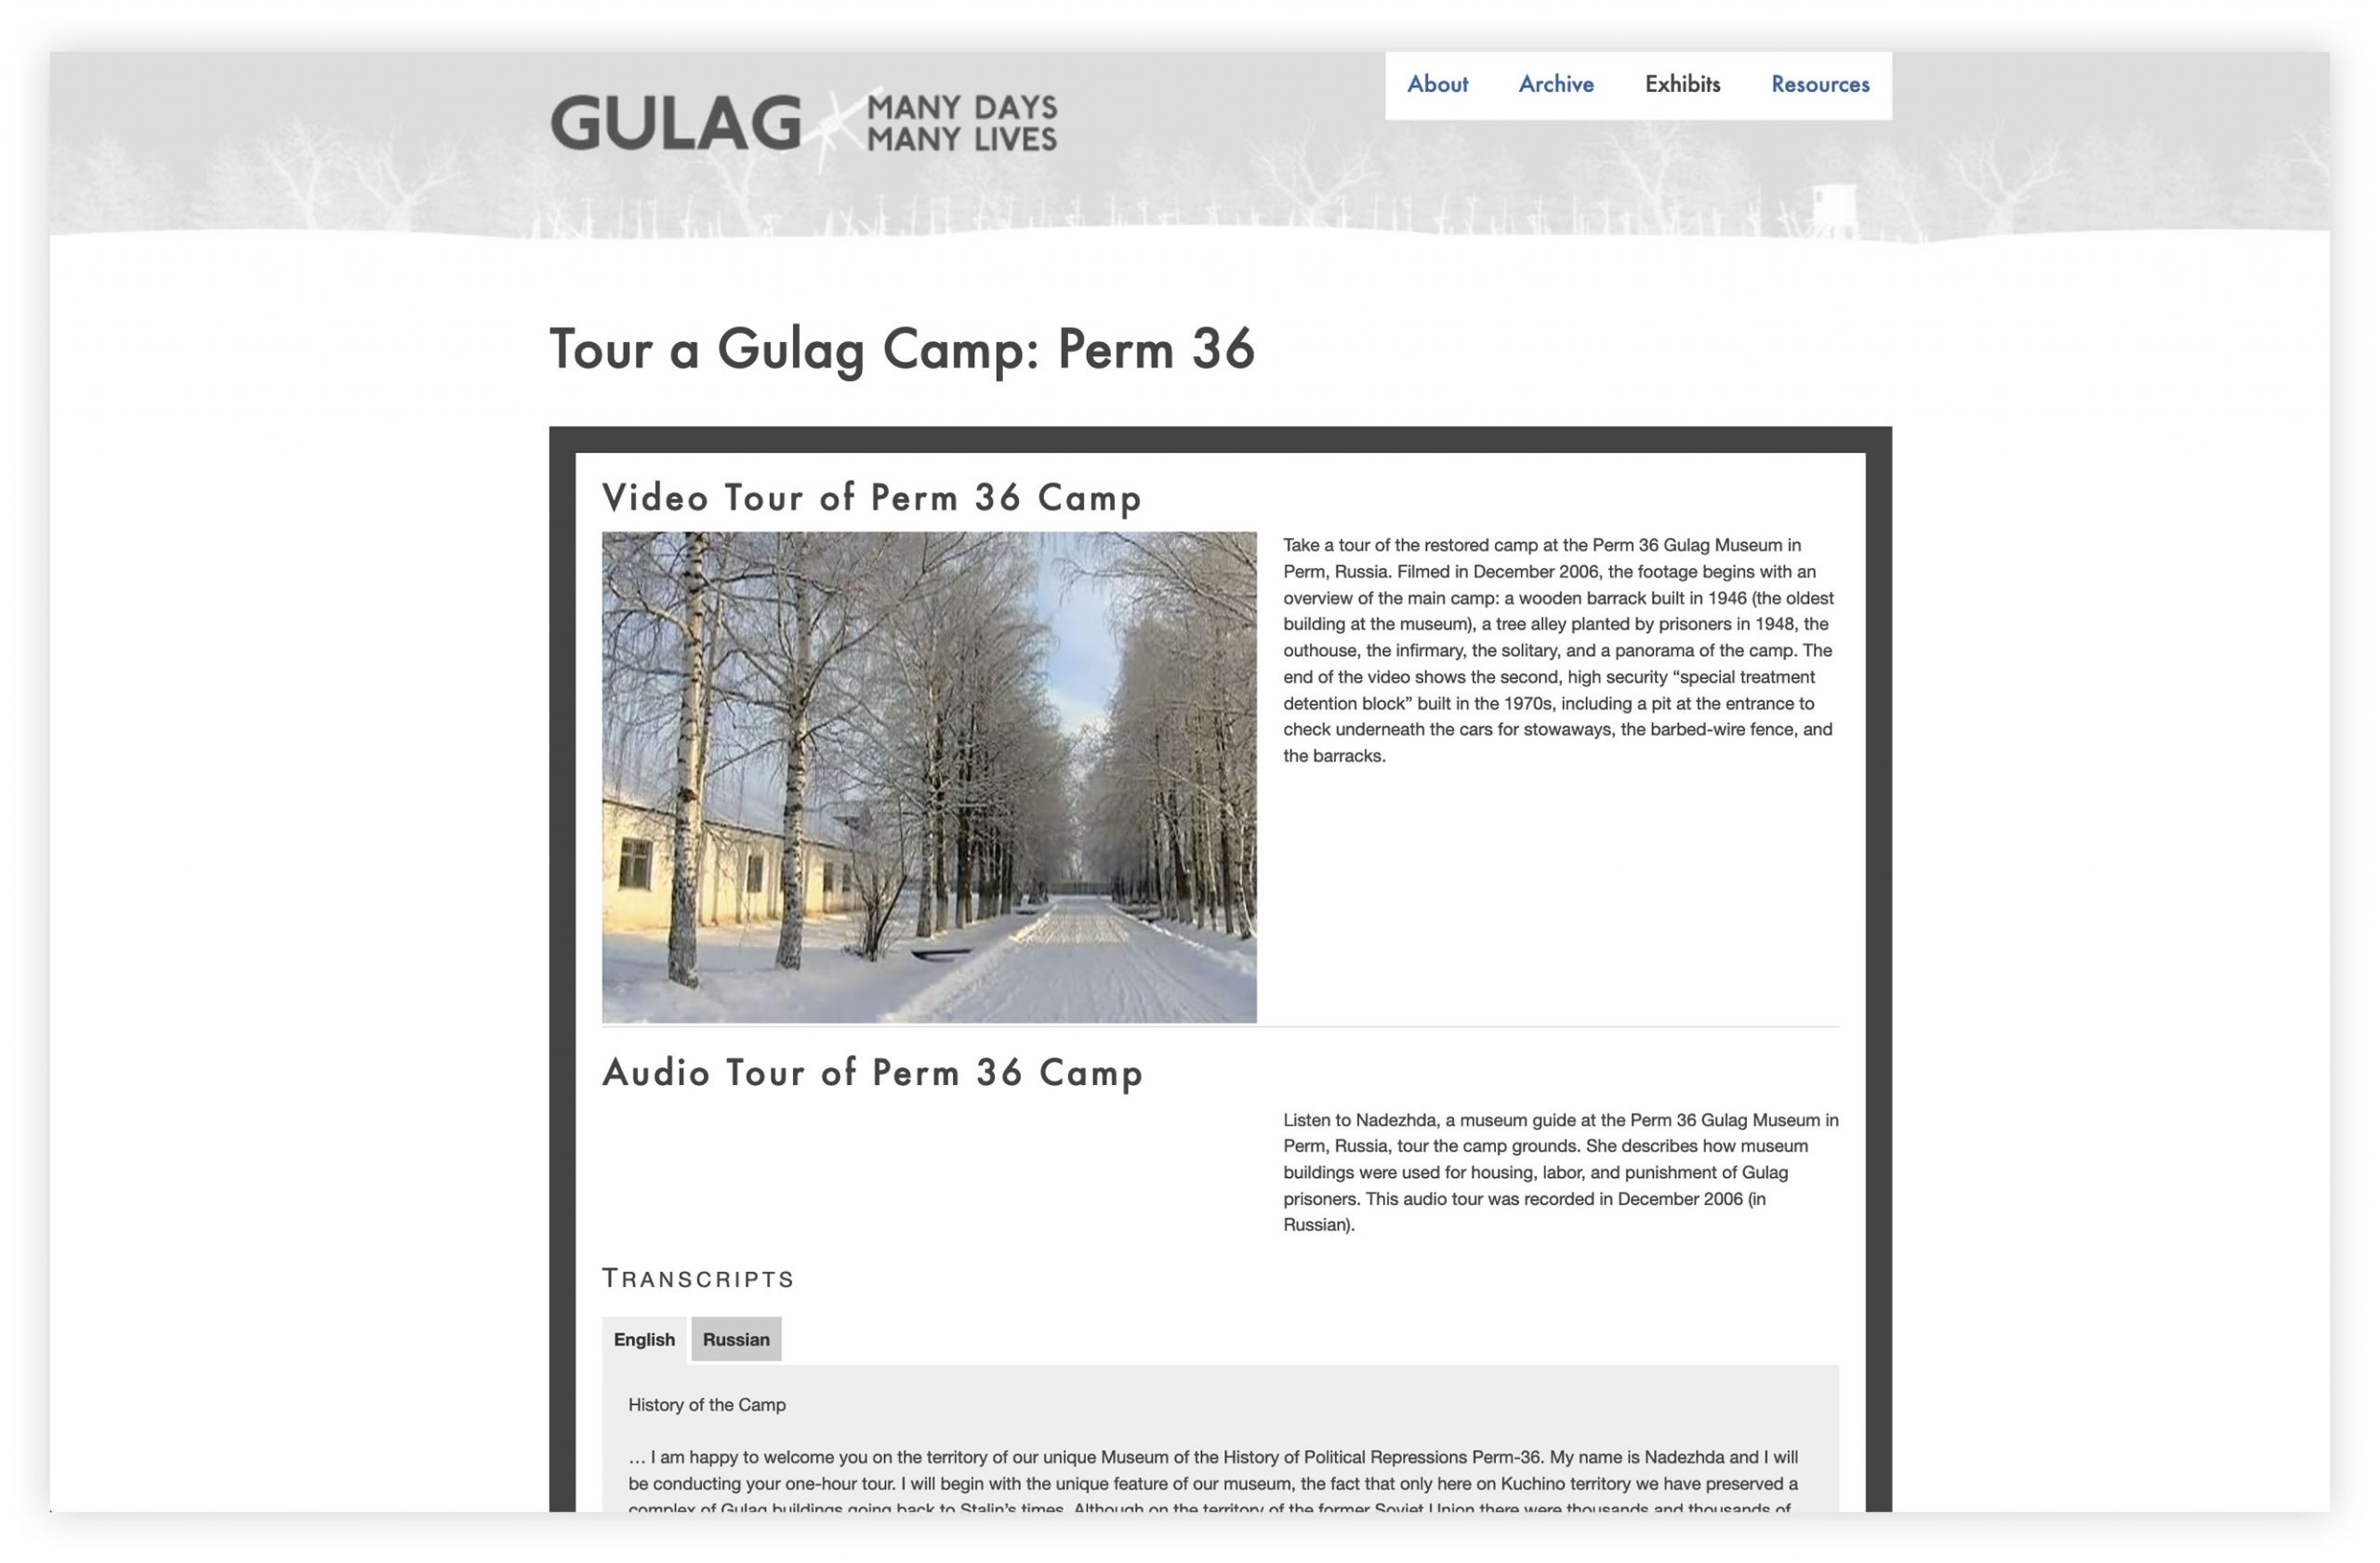 Screengrab from the Exhibits section of the Gulag website which reads, "Tour a Gulag Camp: Perm 36."